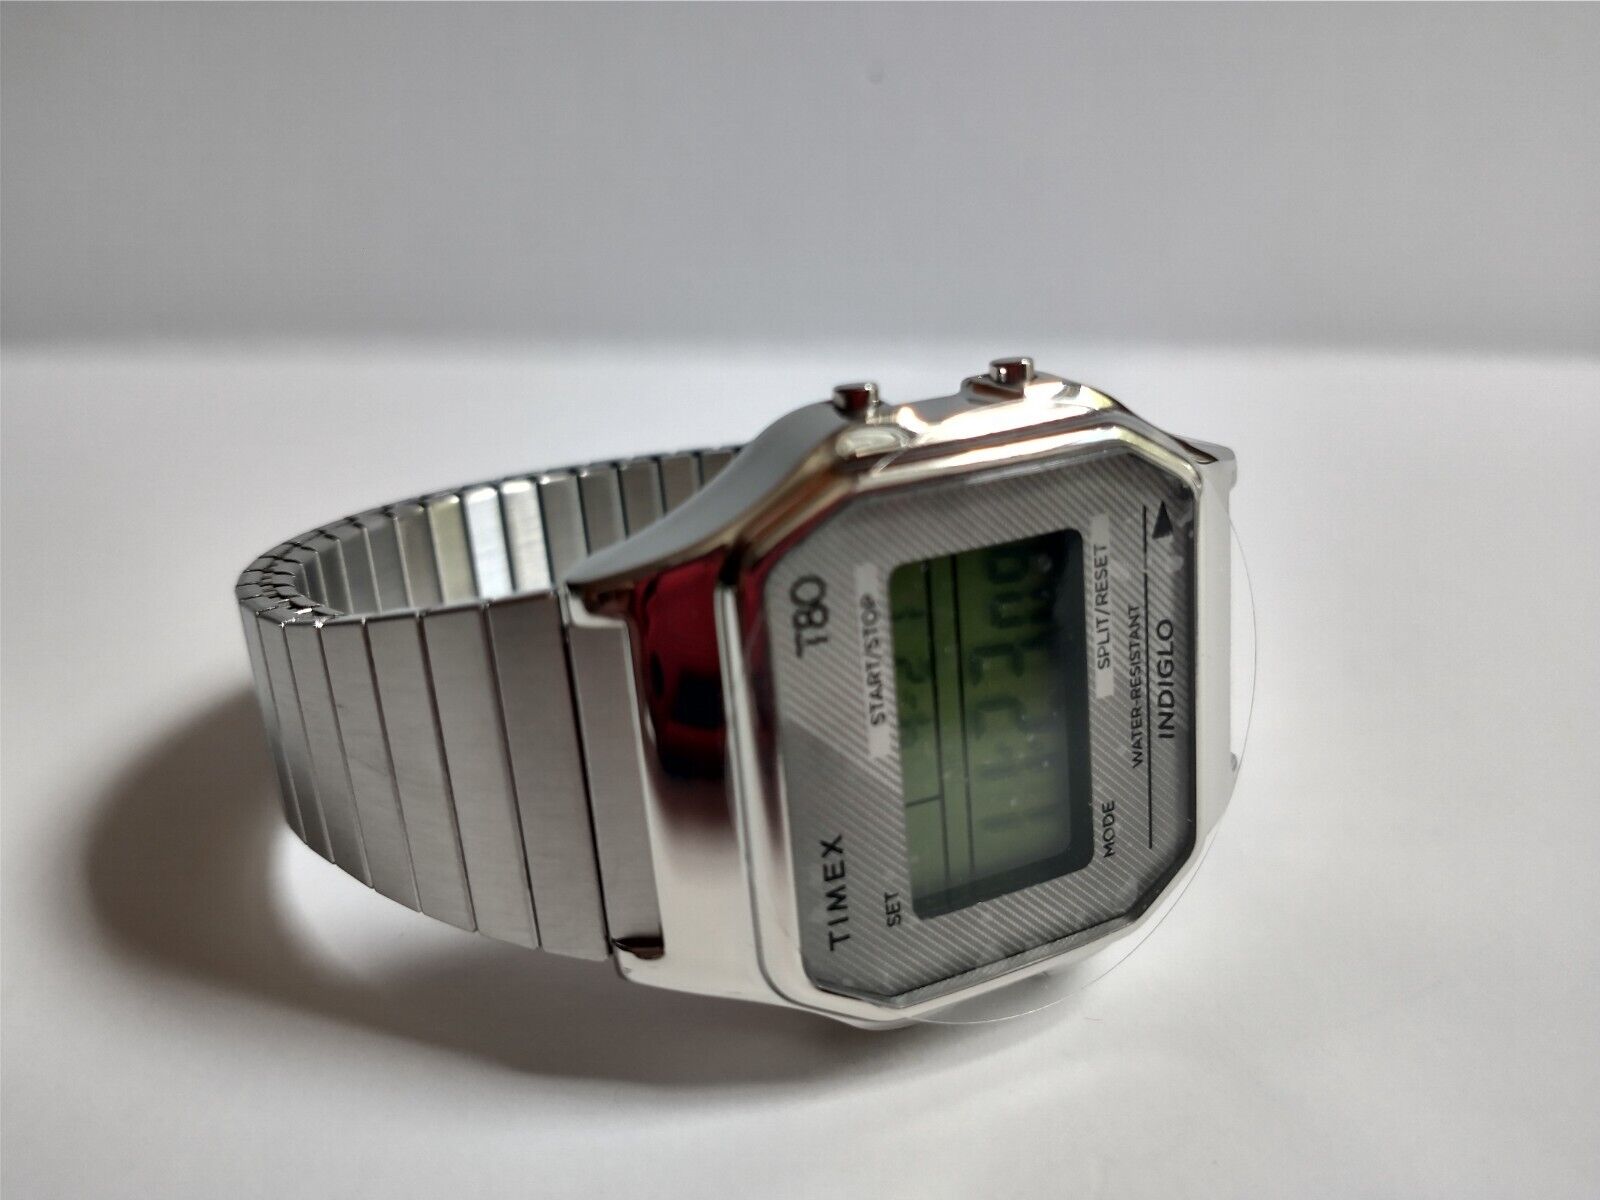 T80 Digital Watch Collection - Retro Stainless Steel Watches